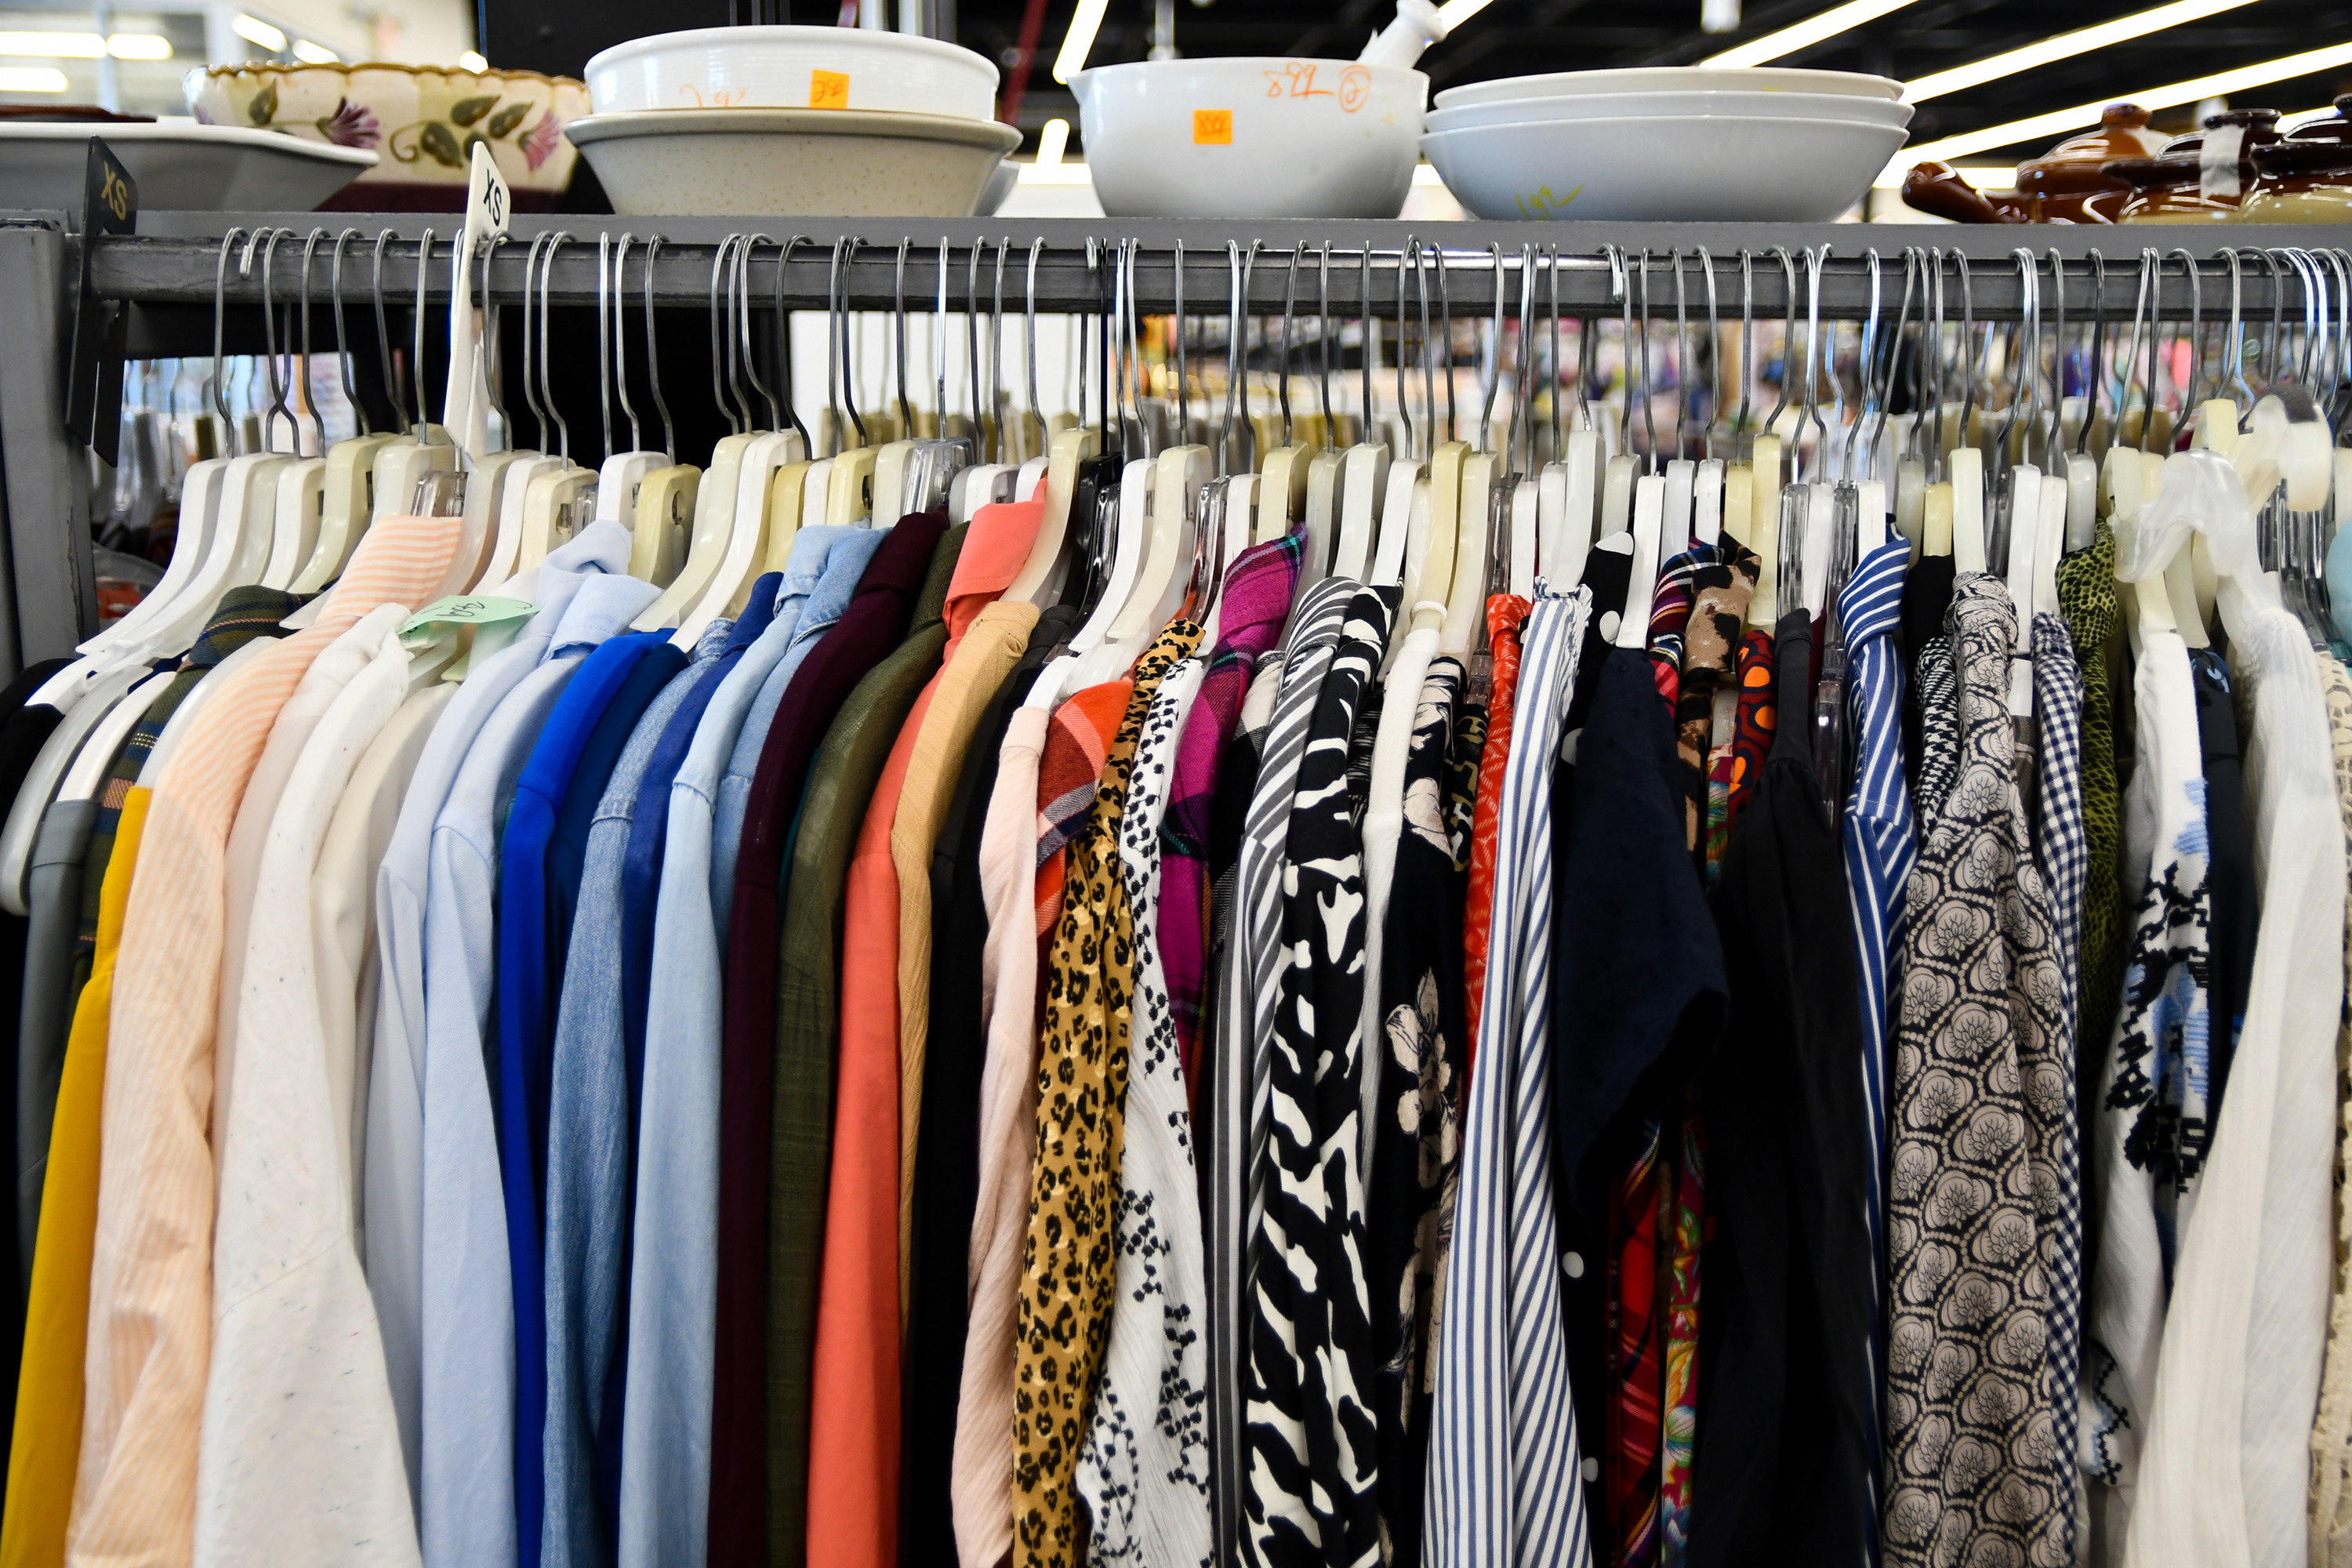 The gentrification of thrift shopping | The Stony Brook Press